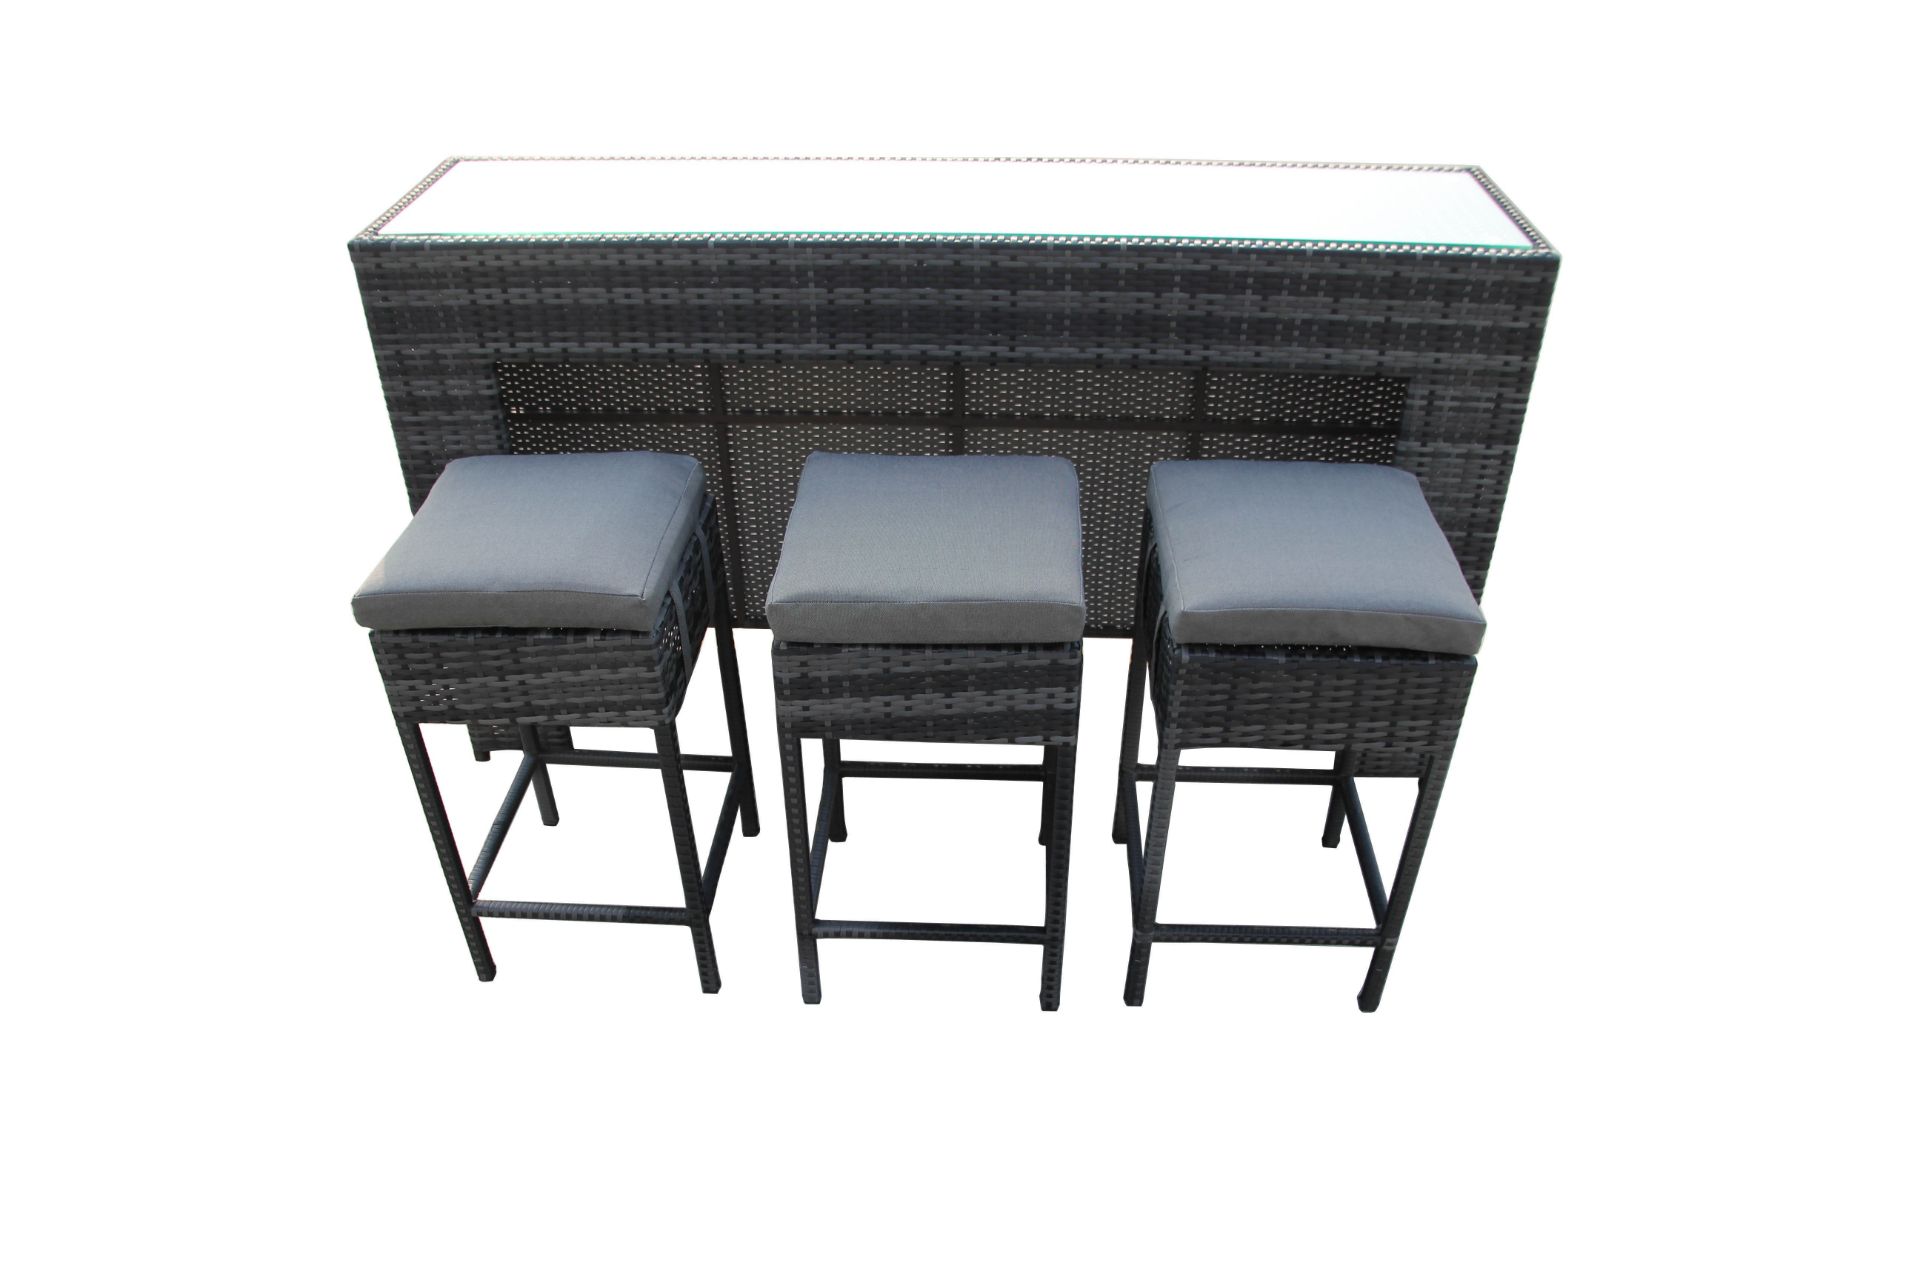 Box New Rattan 4P/C Garden Bar And Stools, C/W Bar Counter & Glass Top, 3 Stools. - Image 4 of 4